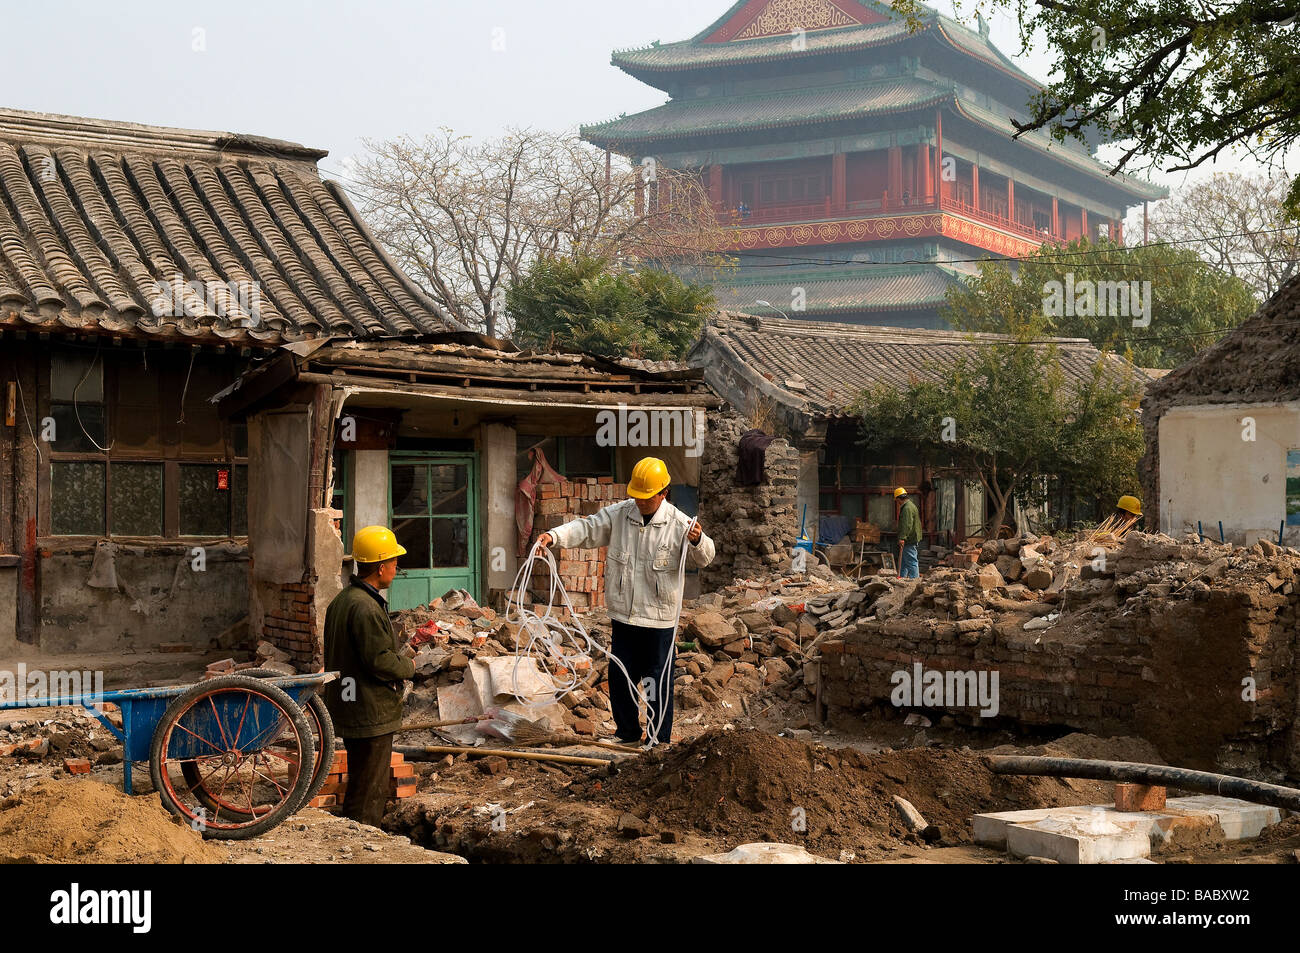 China, Beijing, former Tartar town also called Inner City, restoration site in a hutong (lane), Drum Tower in the background Stock Photo